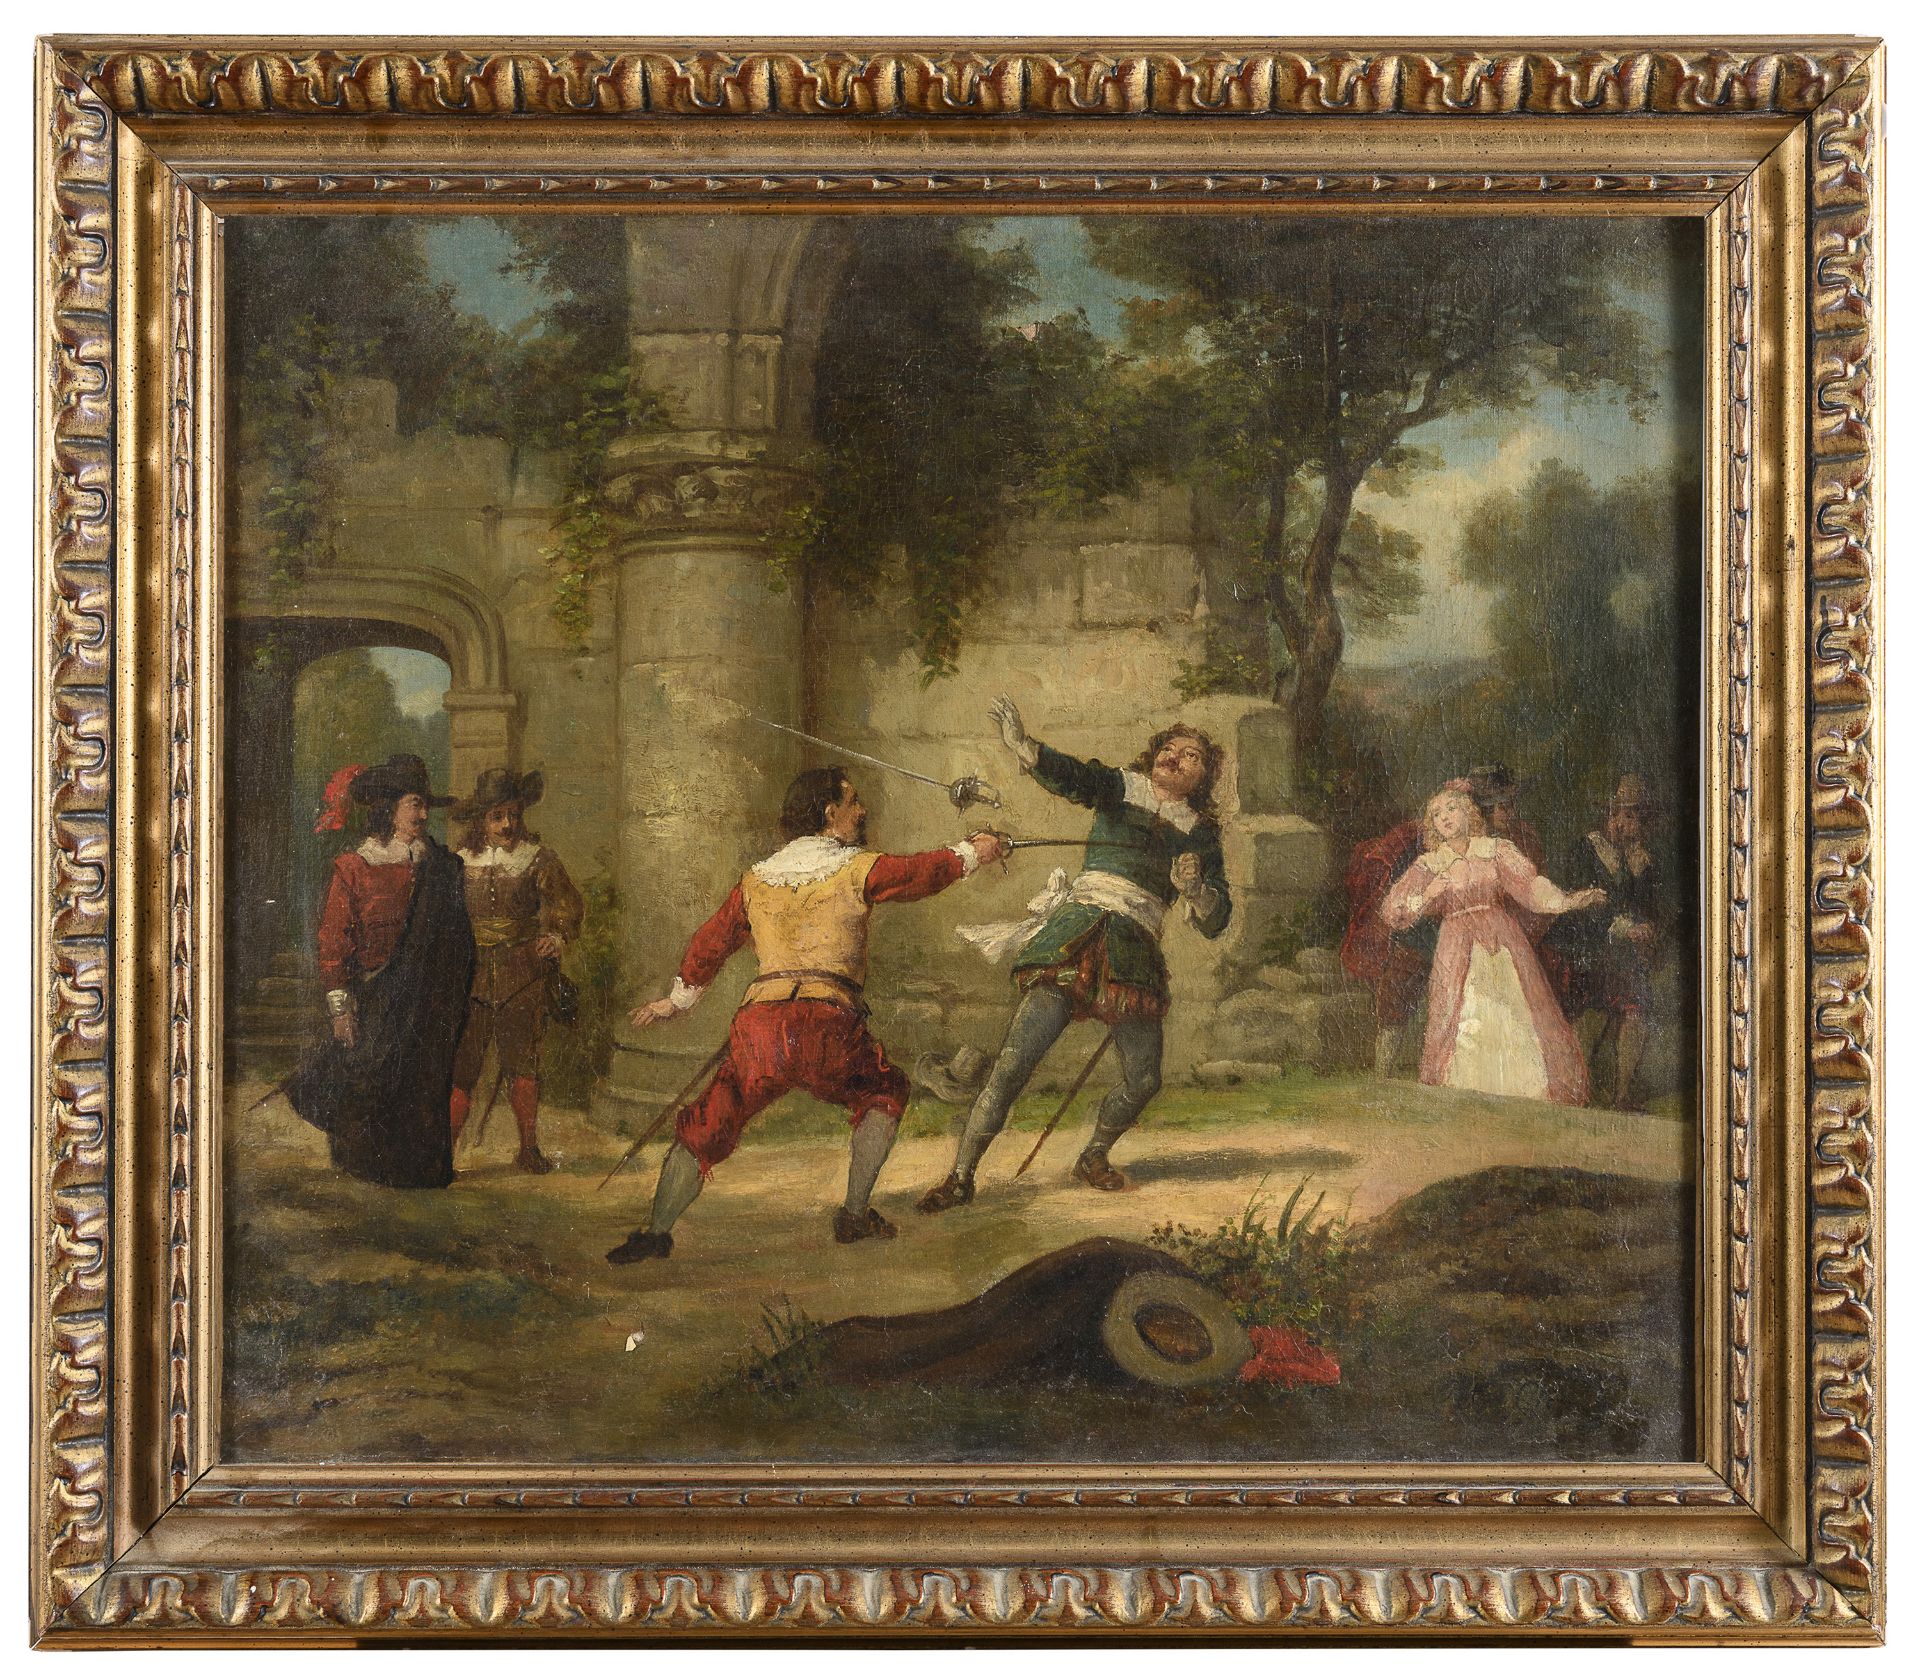 FRENCH OIL PAINTING 19th CENTURY